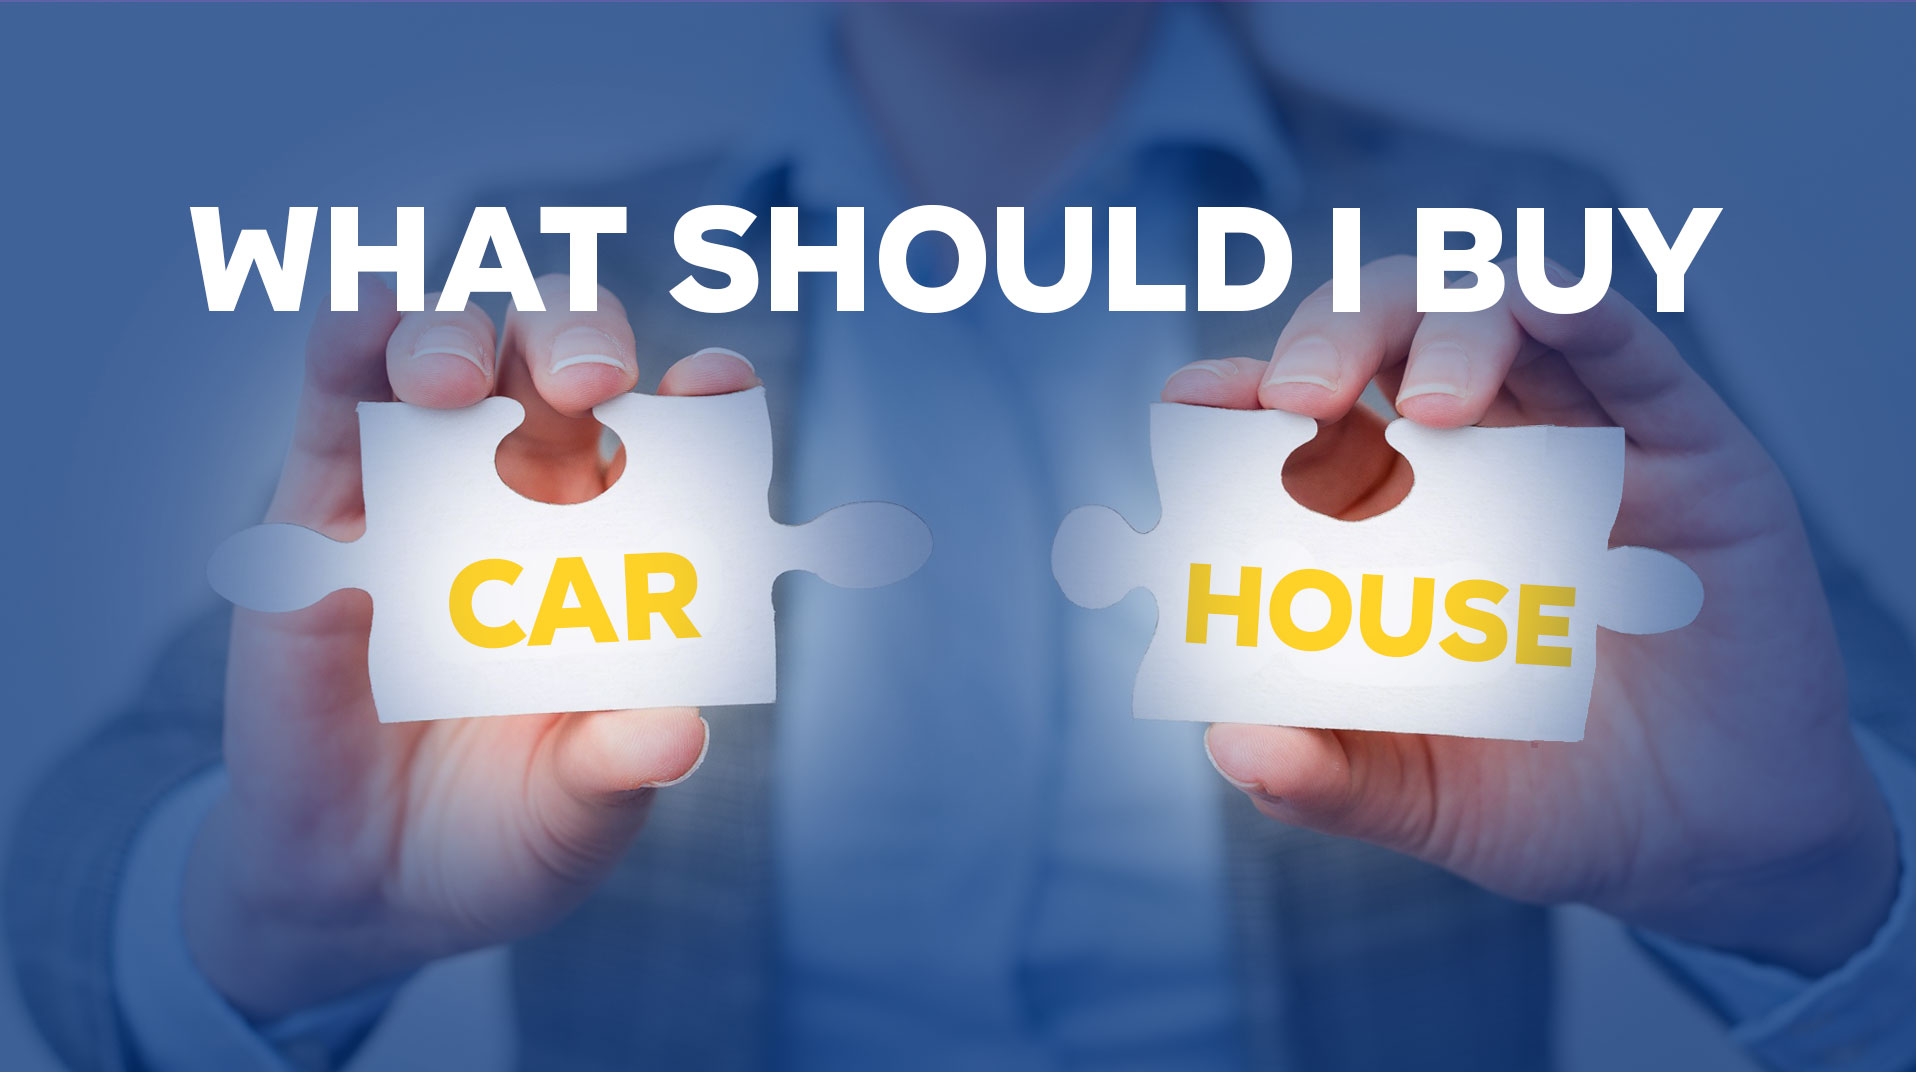 Should I Get a New Car or House First?